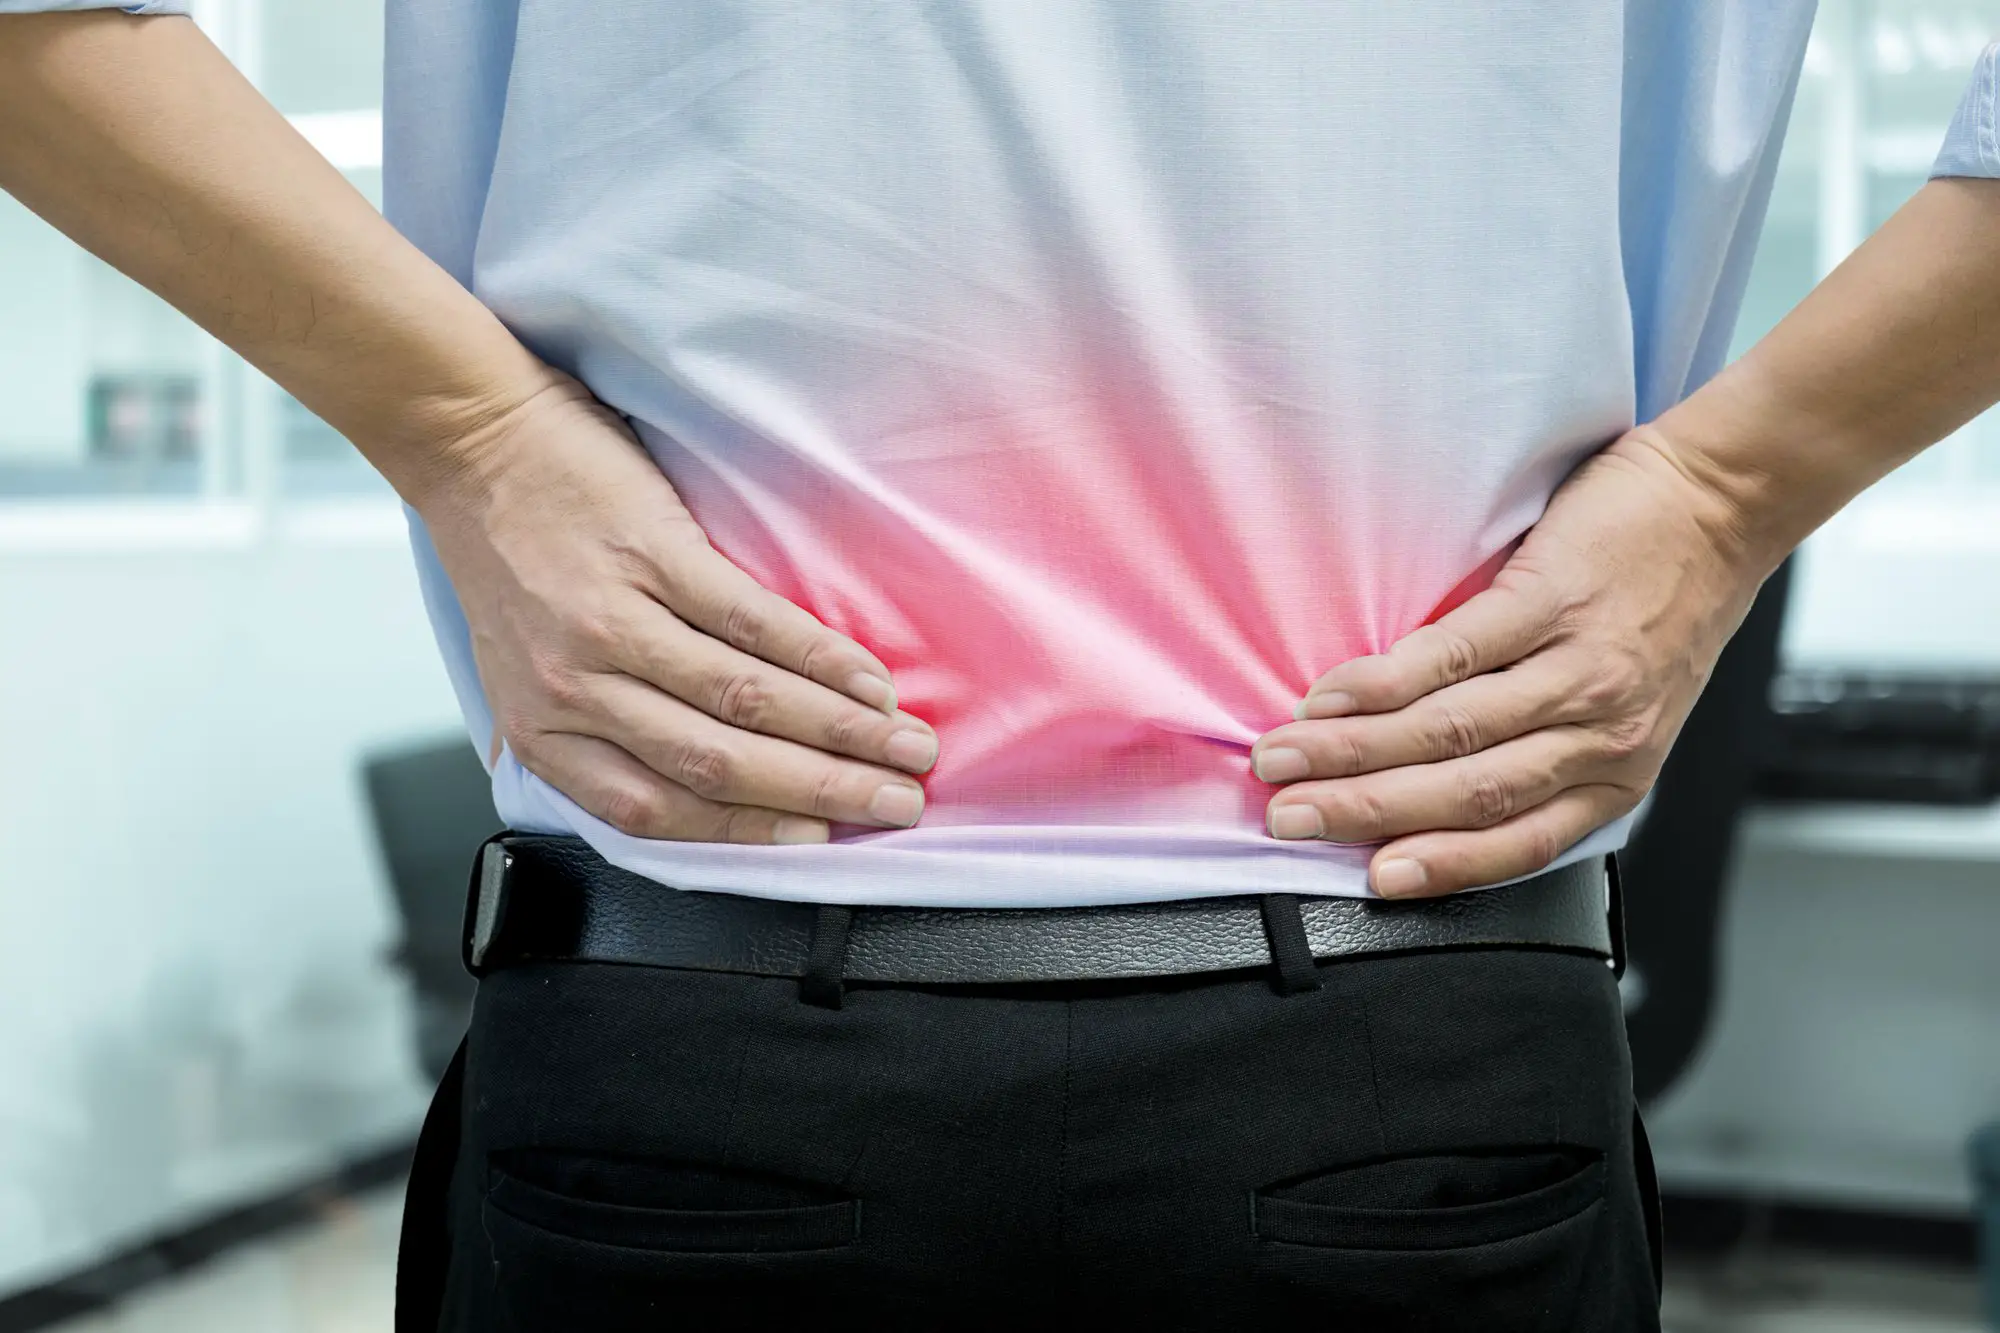 Why Does My Back Always Hurt? 7 Probable Causes